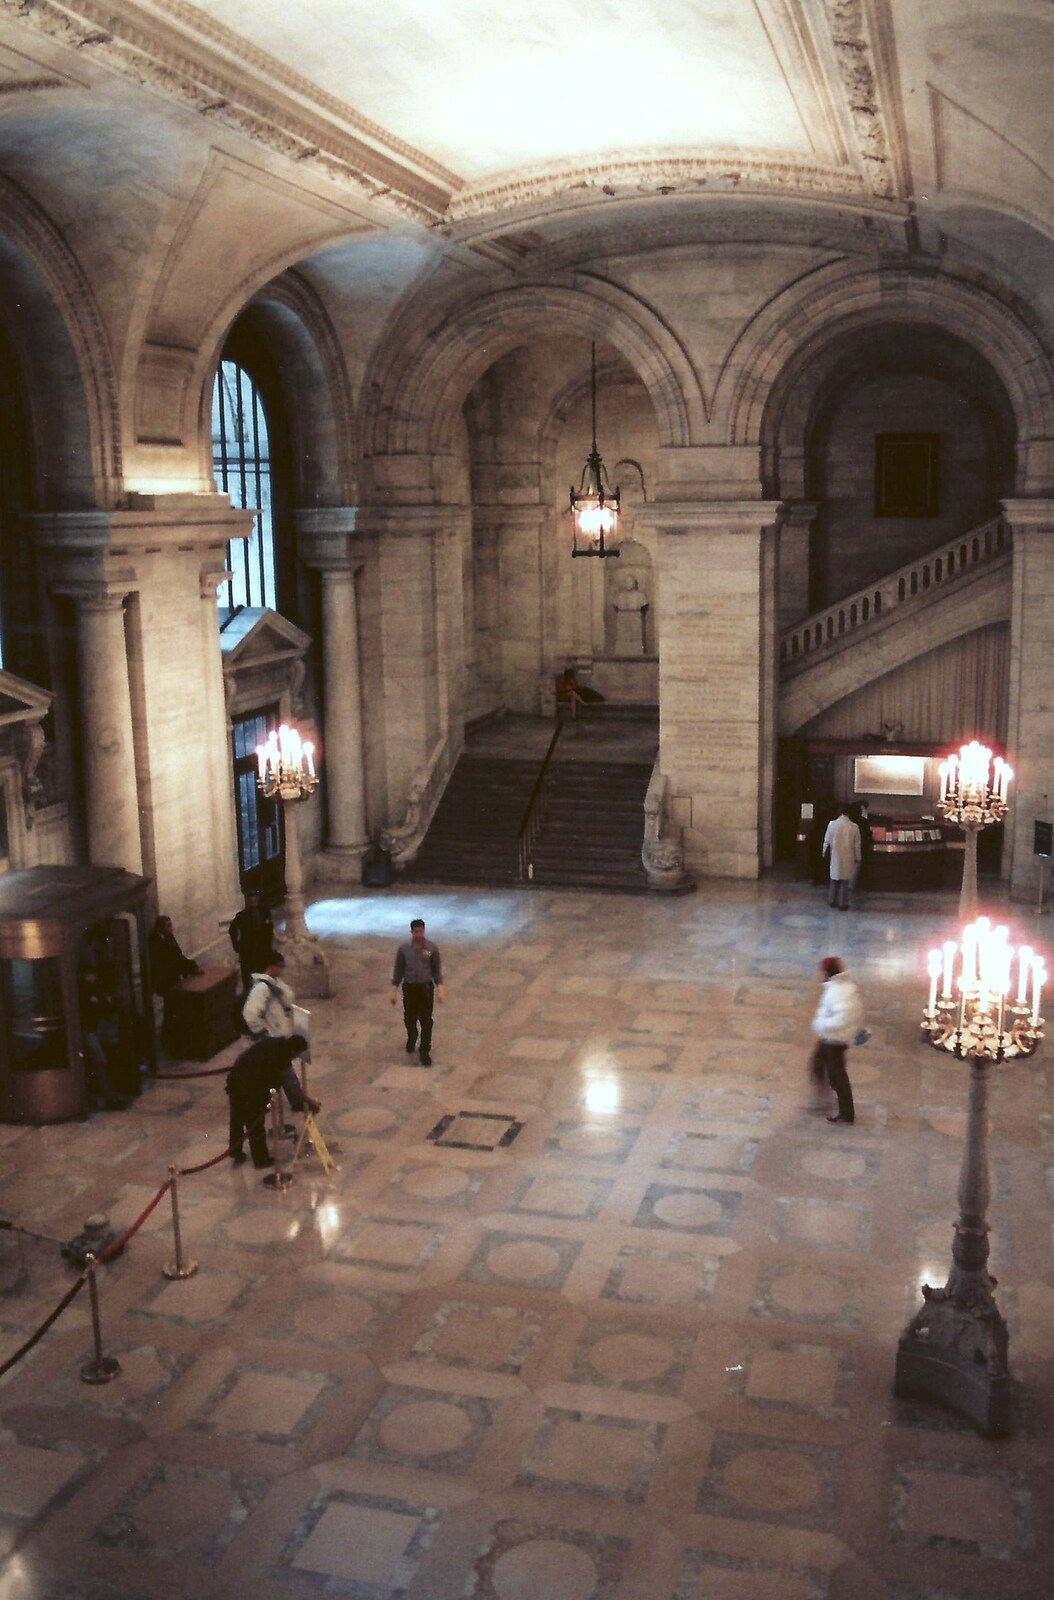 The lobby of the public library from A Trip to New York, New York, USA - 11th March 1995